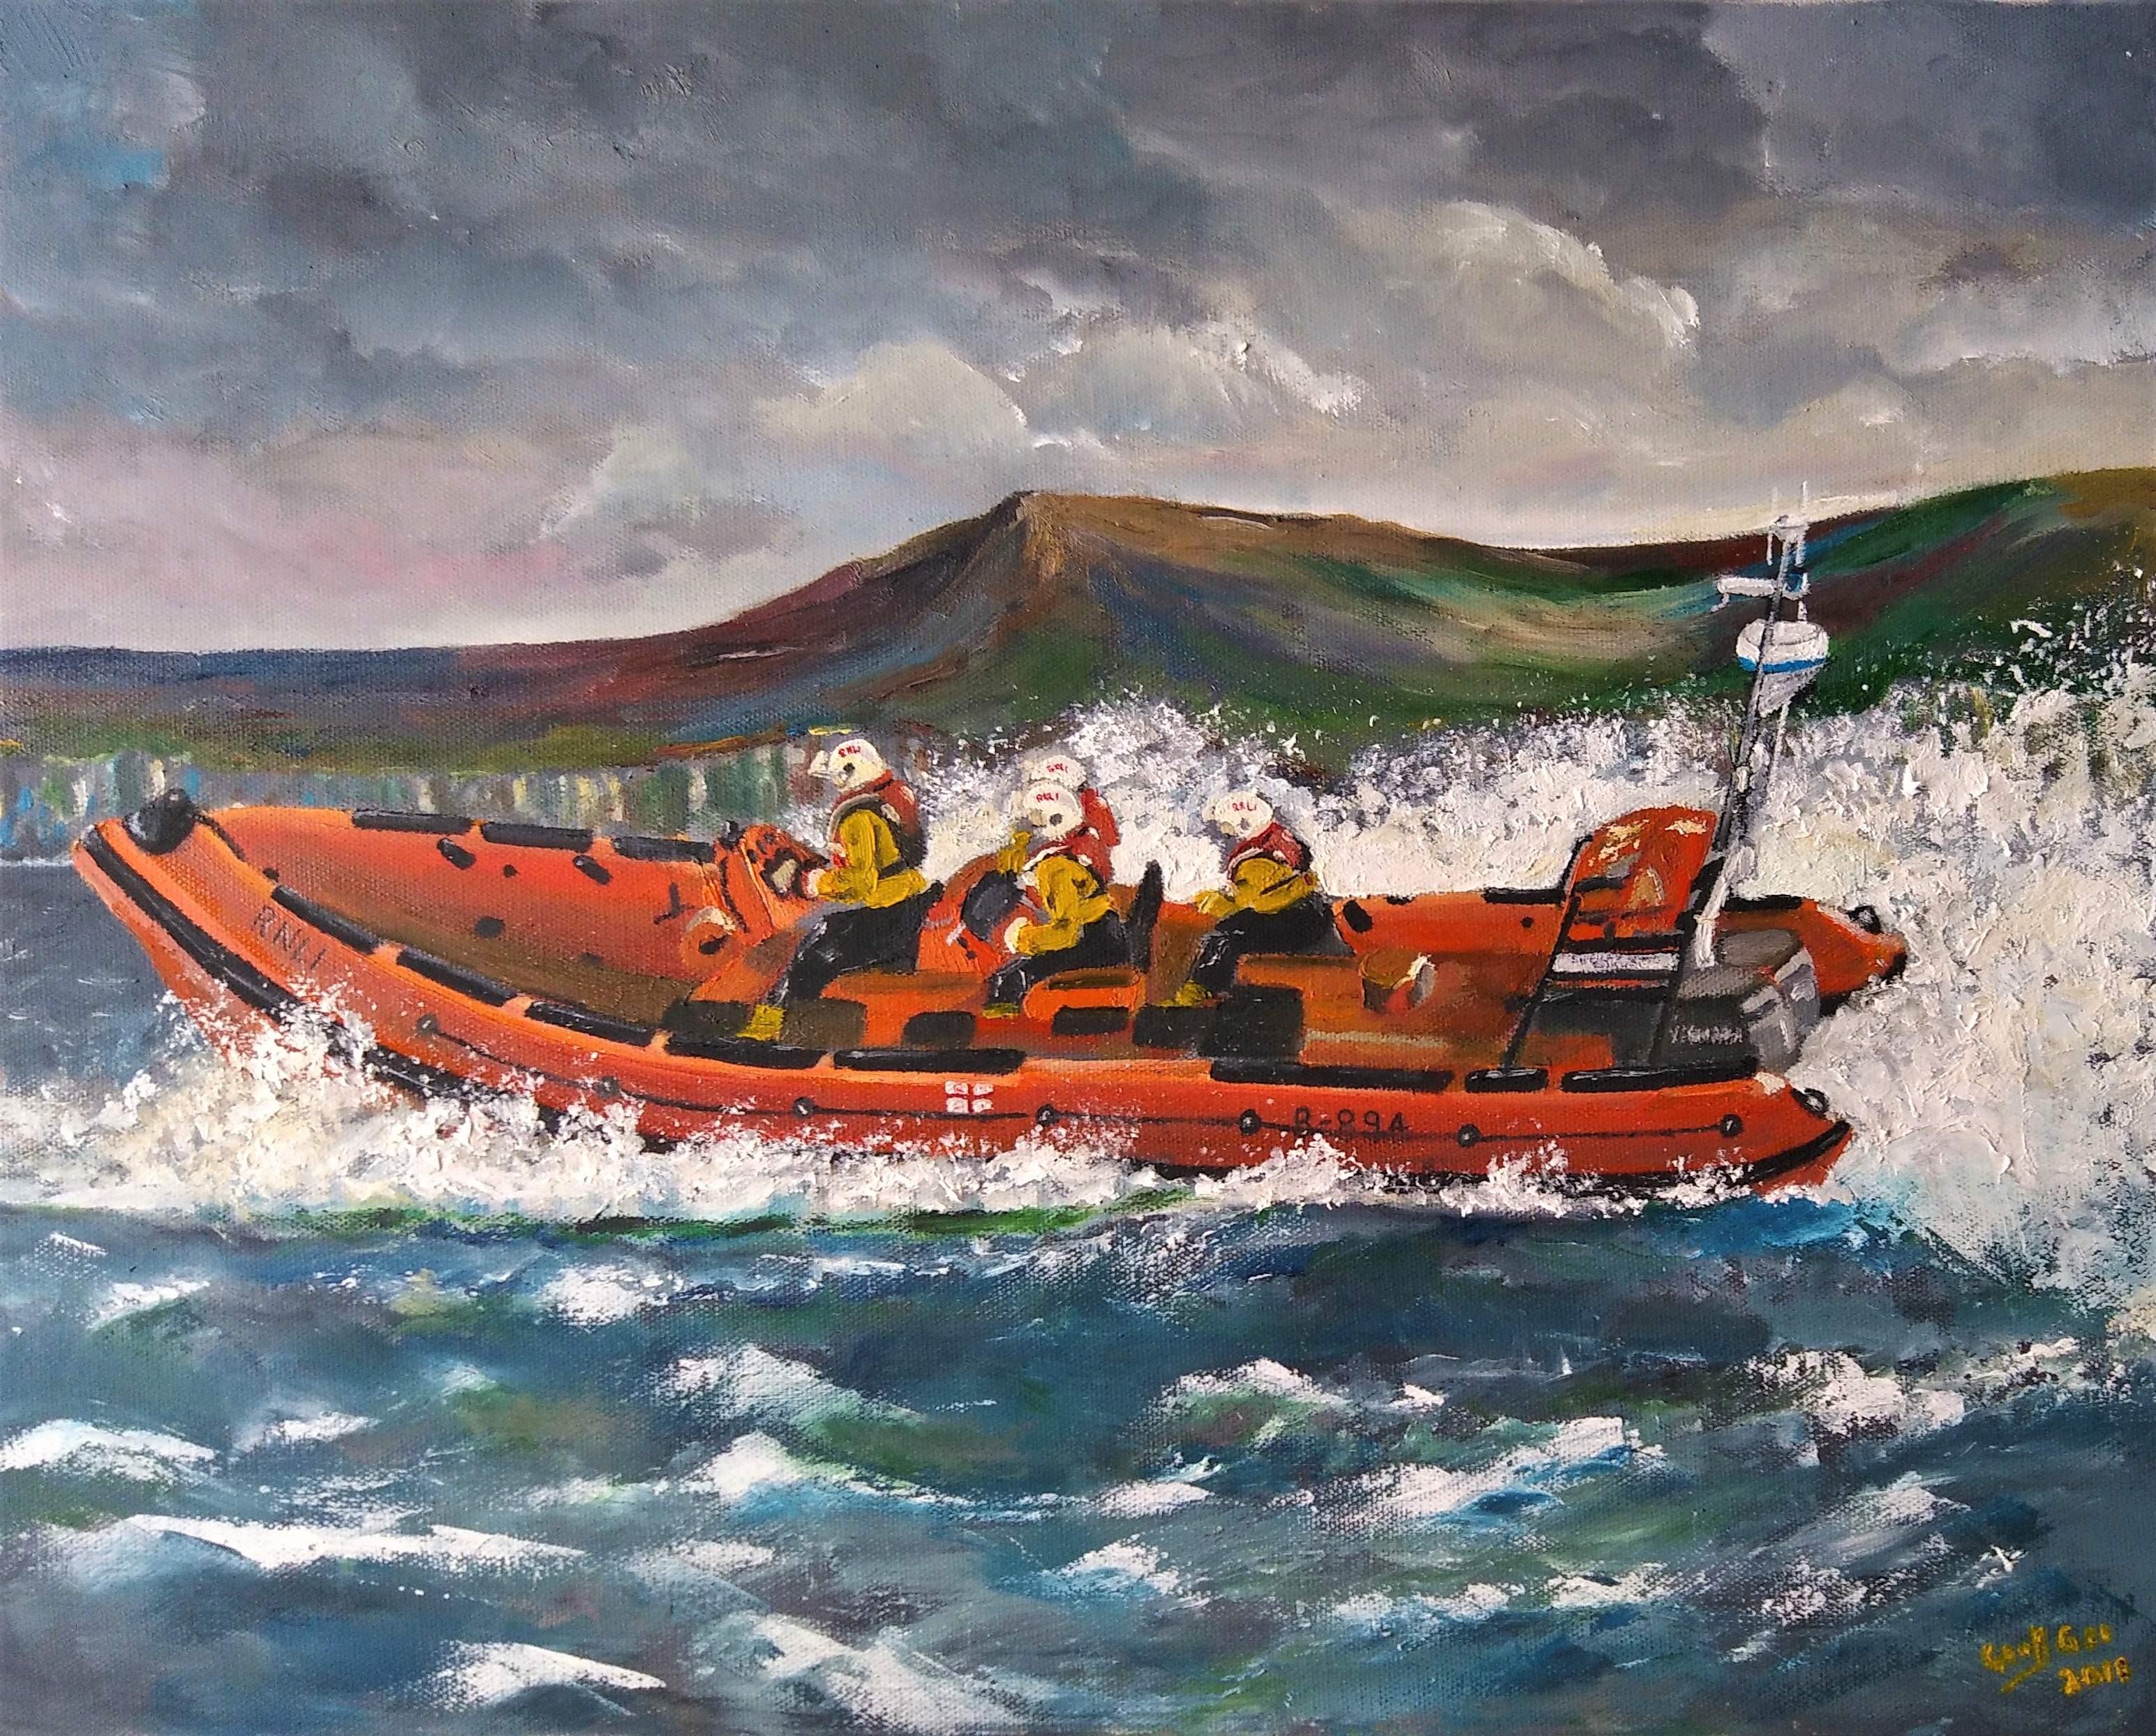 On a Shout (184) Oil on Canvas  20"x16"   Price - Donated  to RNLI